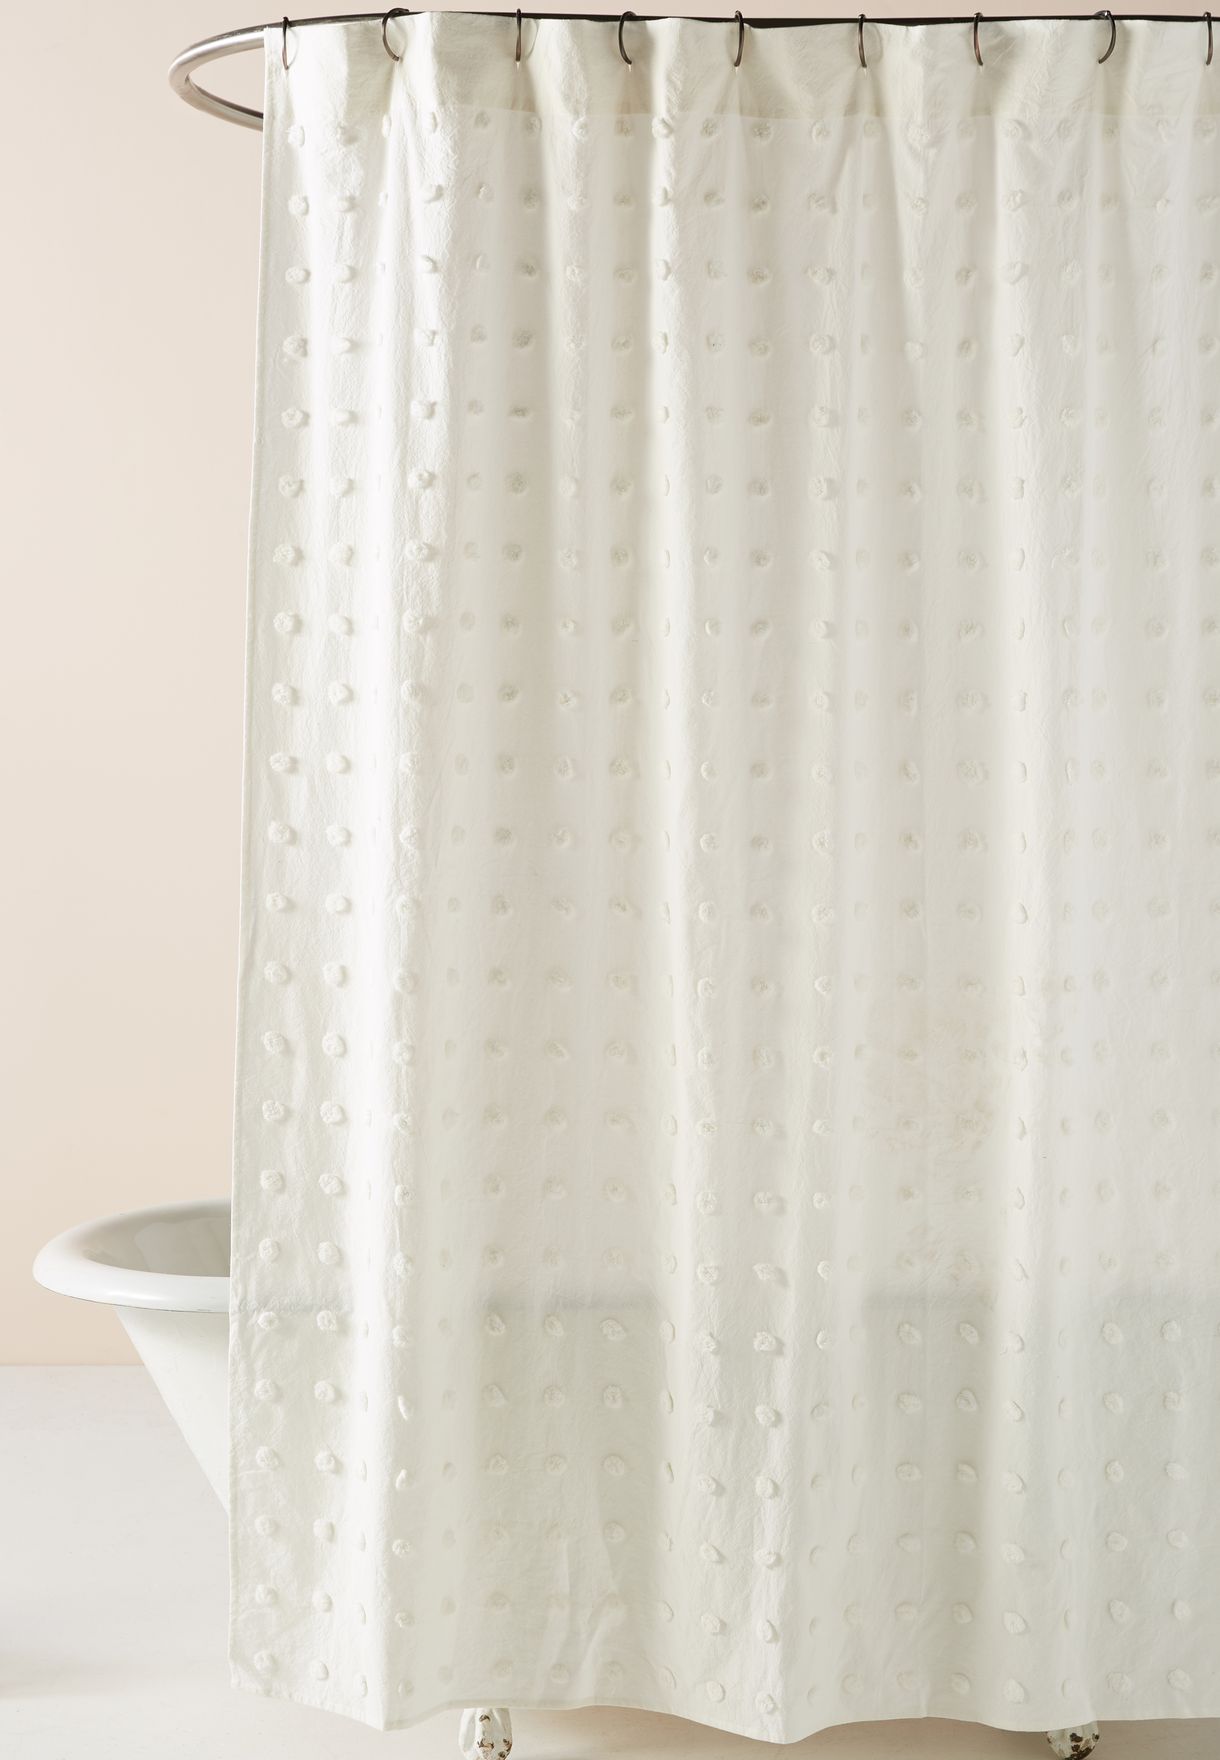 Tufted Makers Shower Curtain, Tufted Shower Curtain